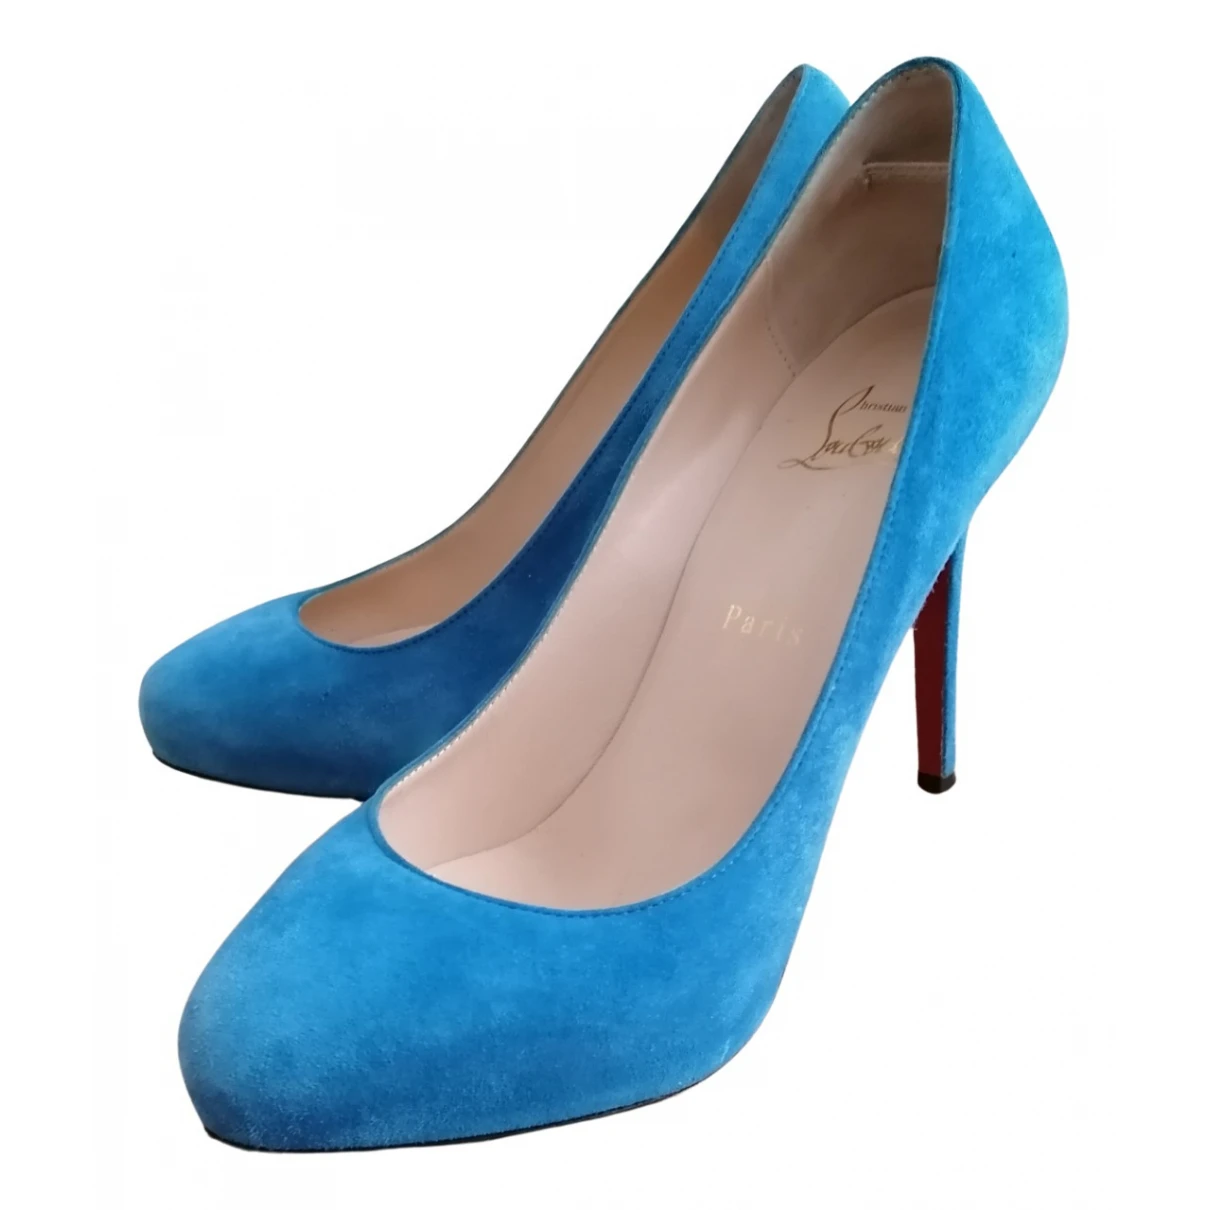 shoes Christian Louboutin heels Simple pump for Female Suede 38.5 EU. Used condition